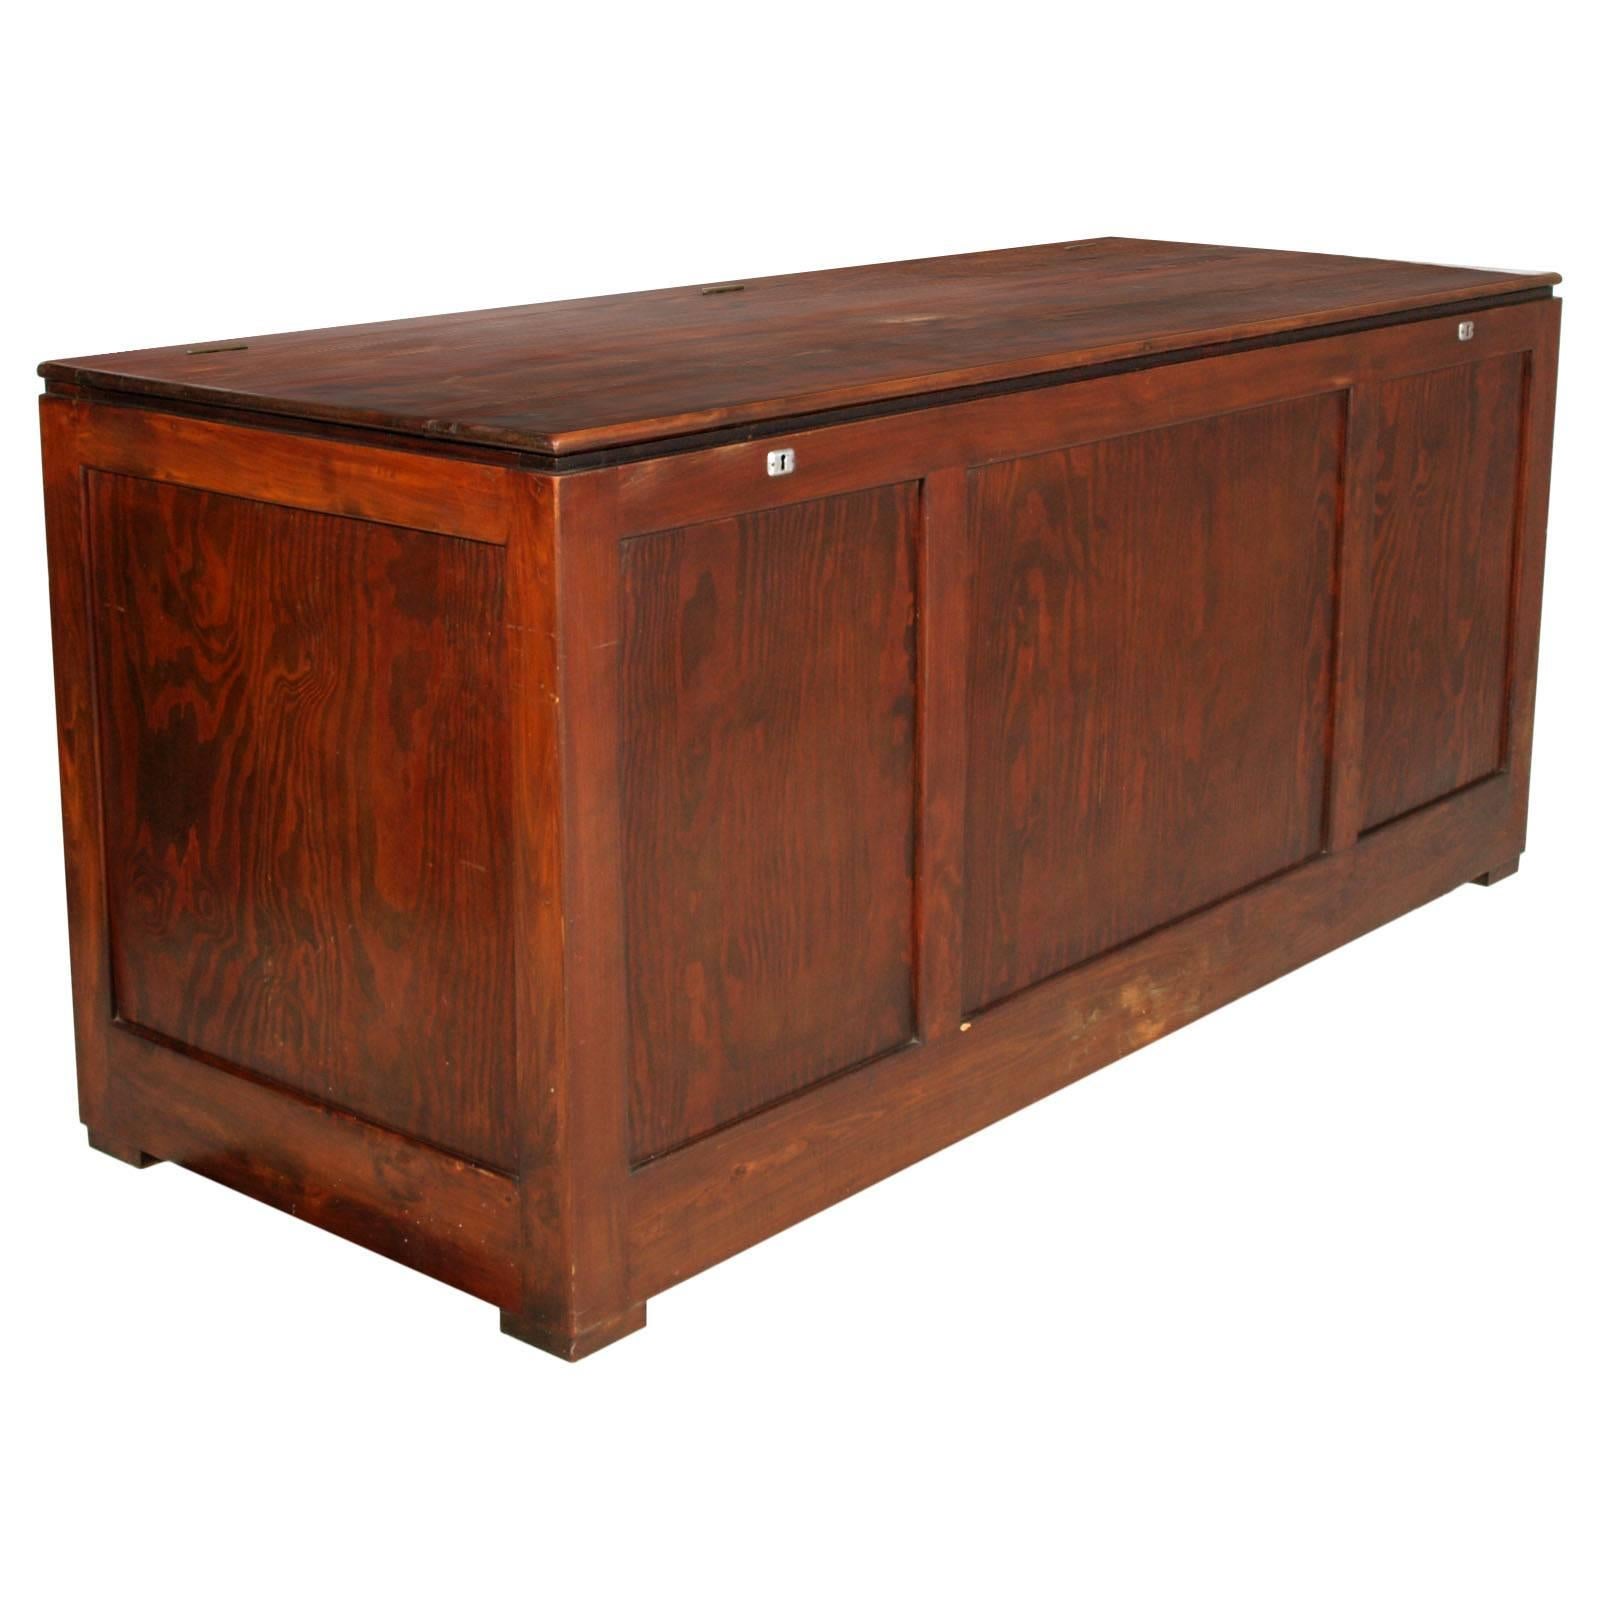 Midcentury Large Trunk for Furs Shelter in Solid Wood of Pine Polished to Wax For Sale